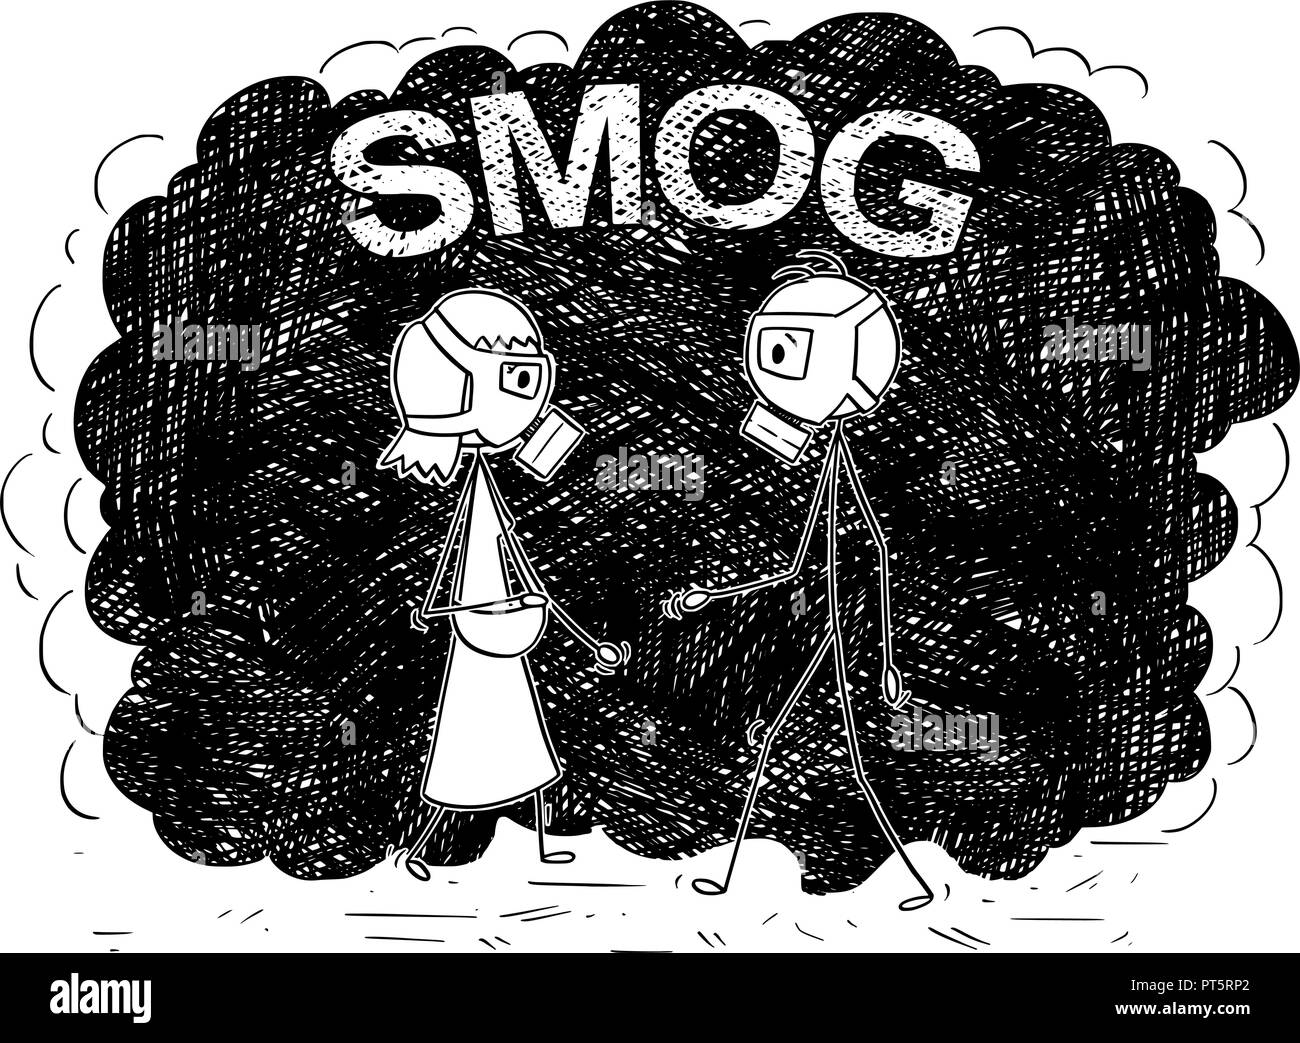 Cartoon of Man and Woman With Gas Masks Walking in Smog or Polluted Air Stock Vector